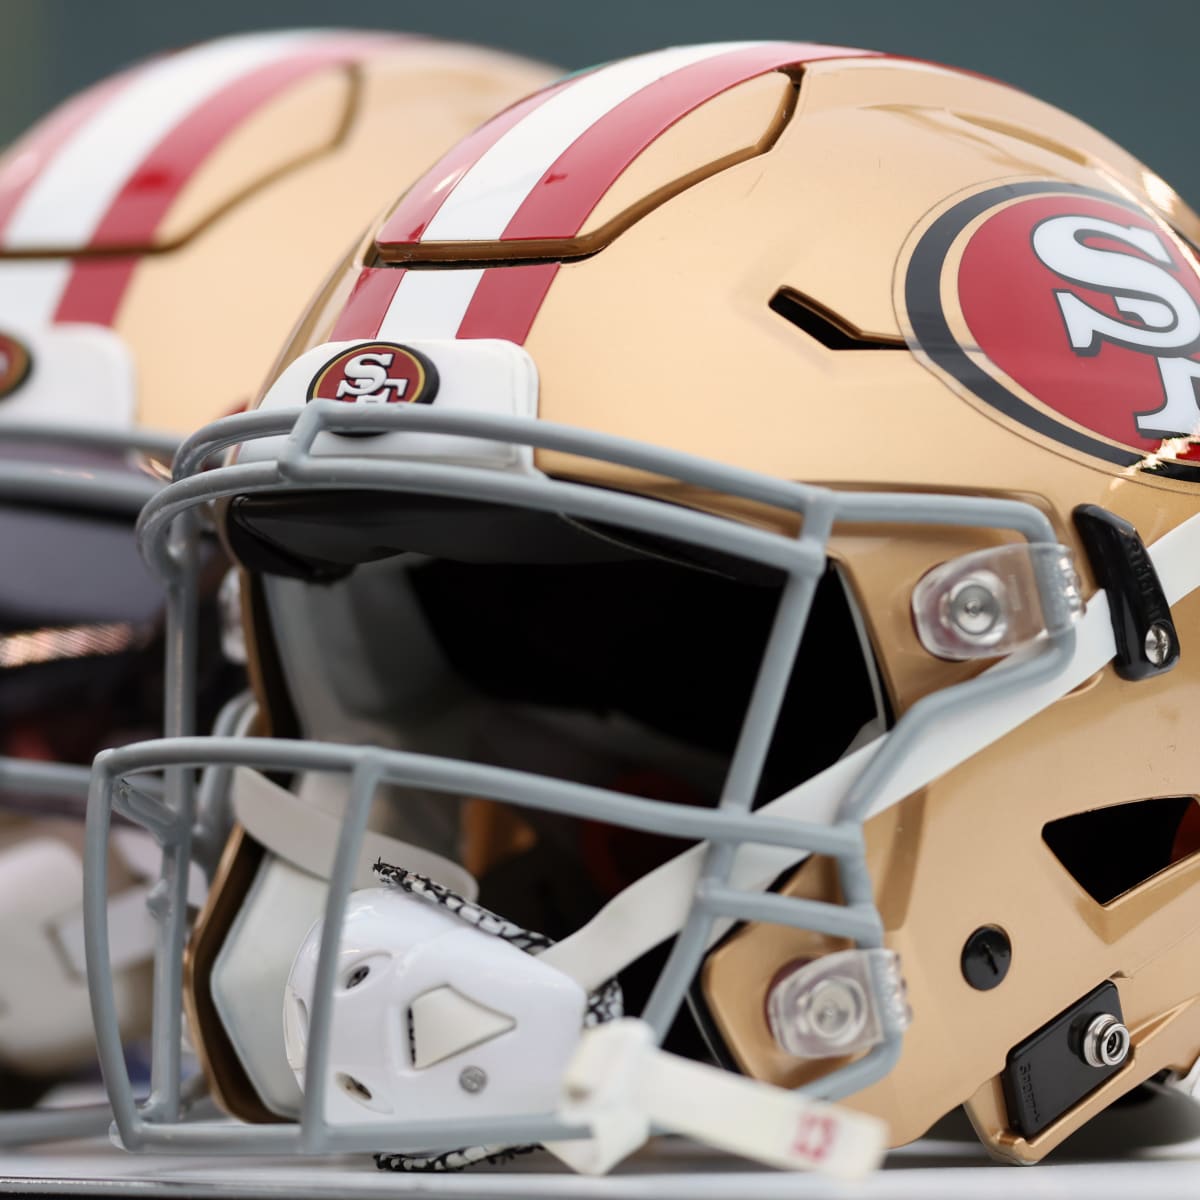 So what's next for the San Francisco 49ers in 2023?